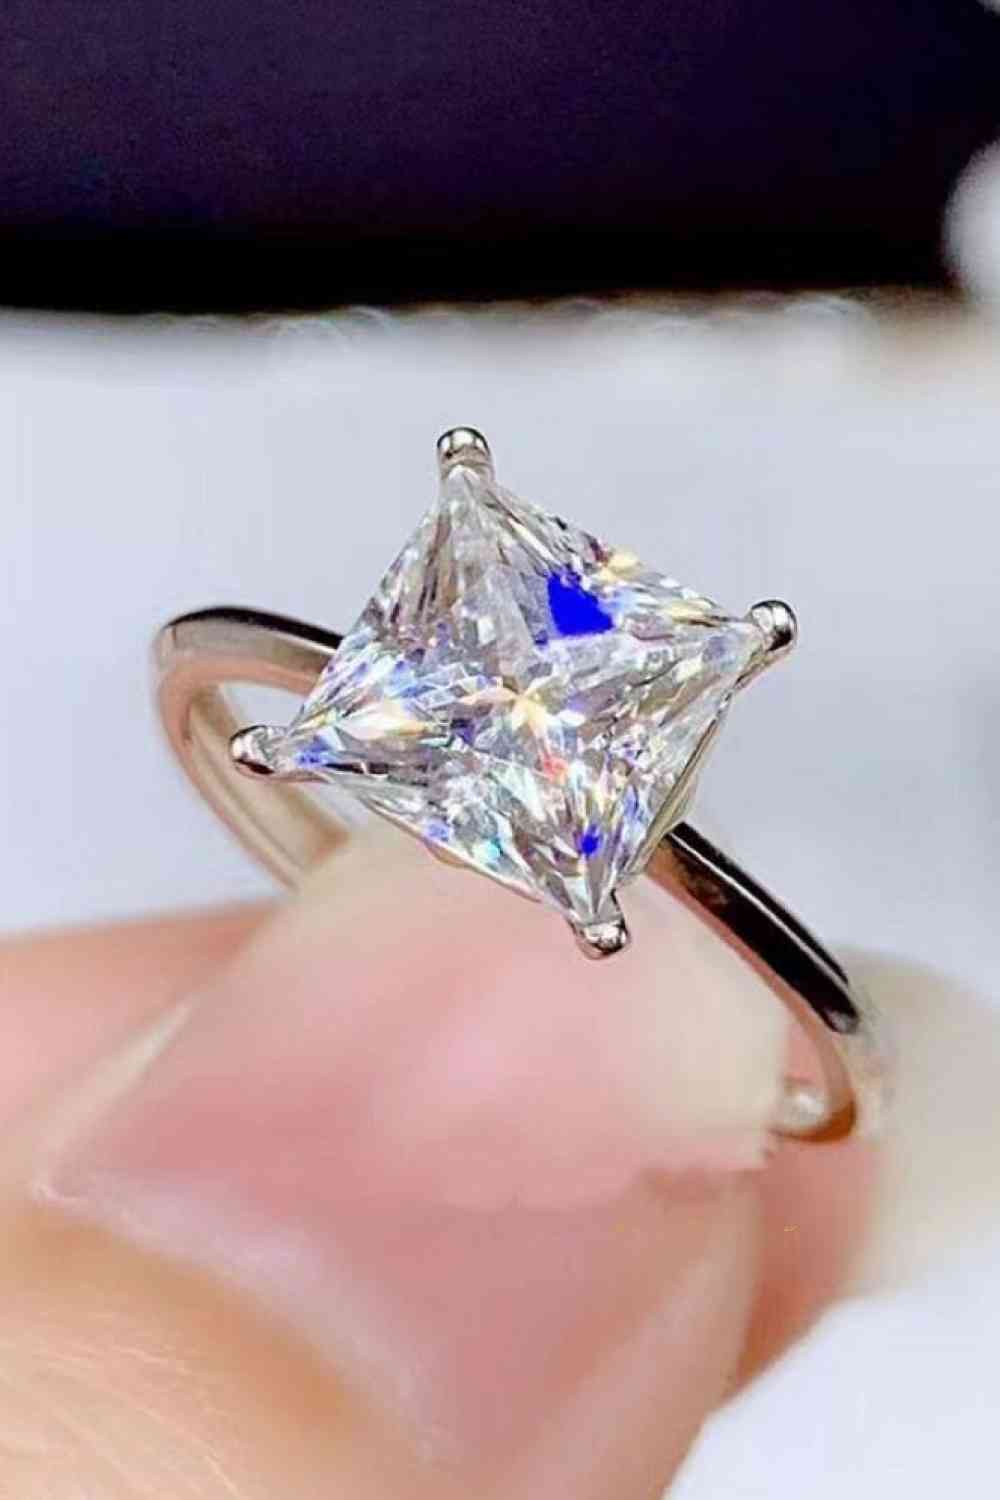 a close up of a person's hand holding a ring with a princess cut